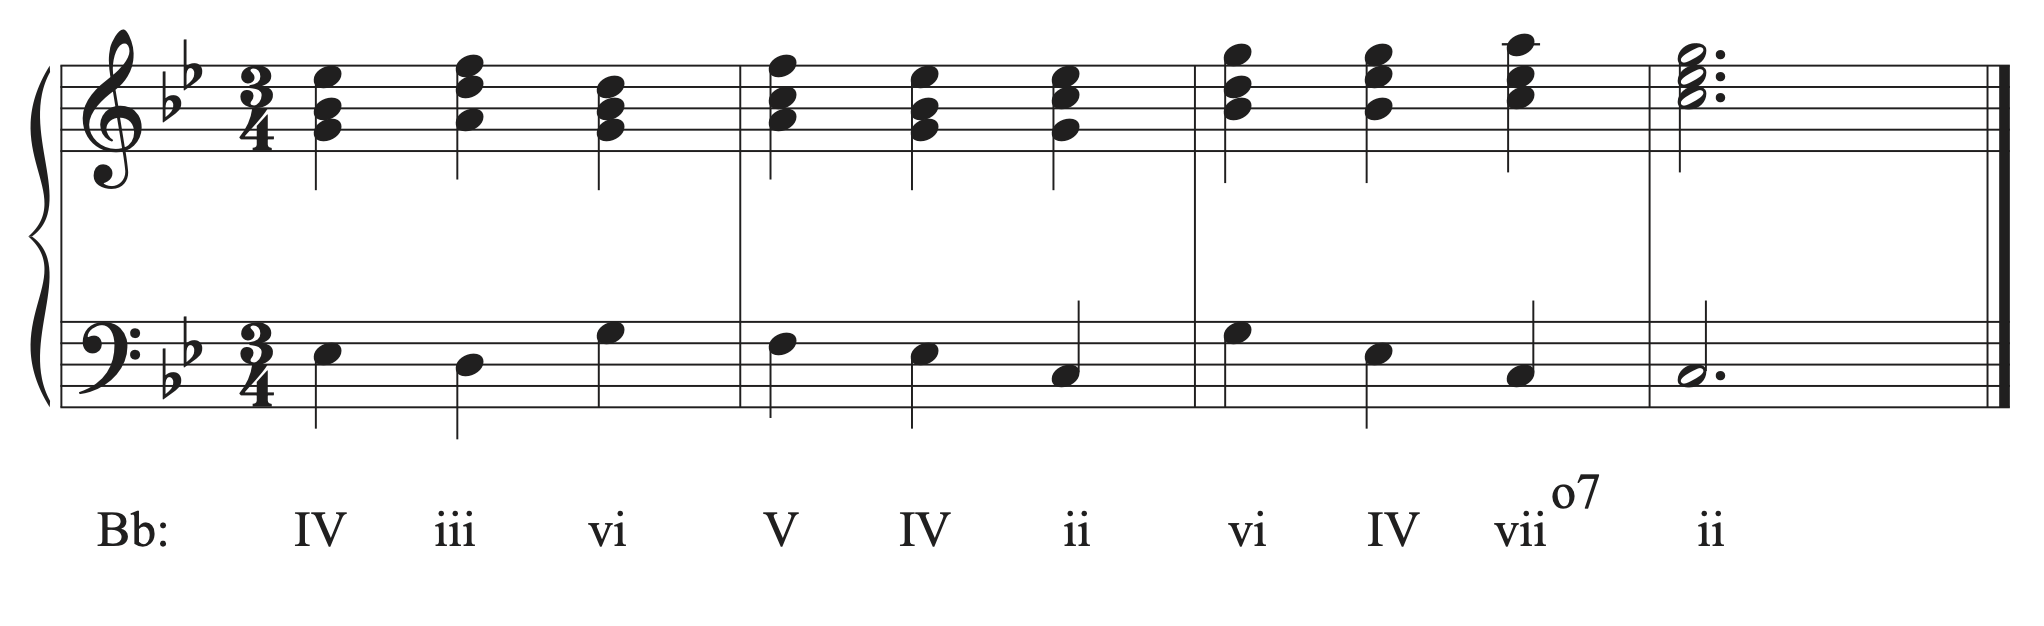 A musical example with a harmonic progression that uses unexpected chord connections.